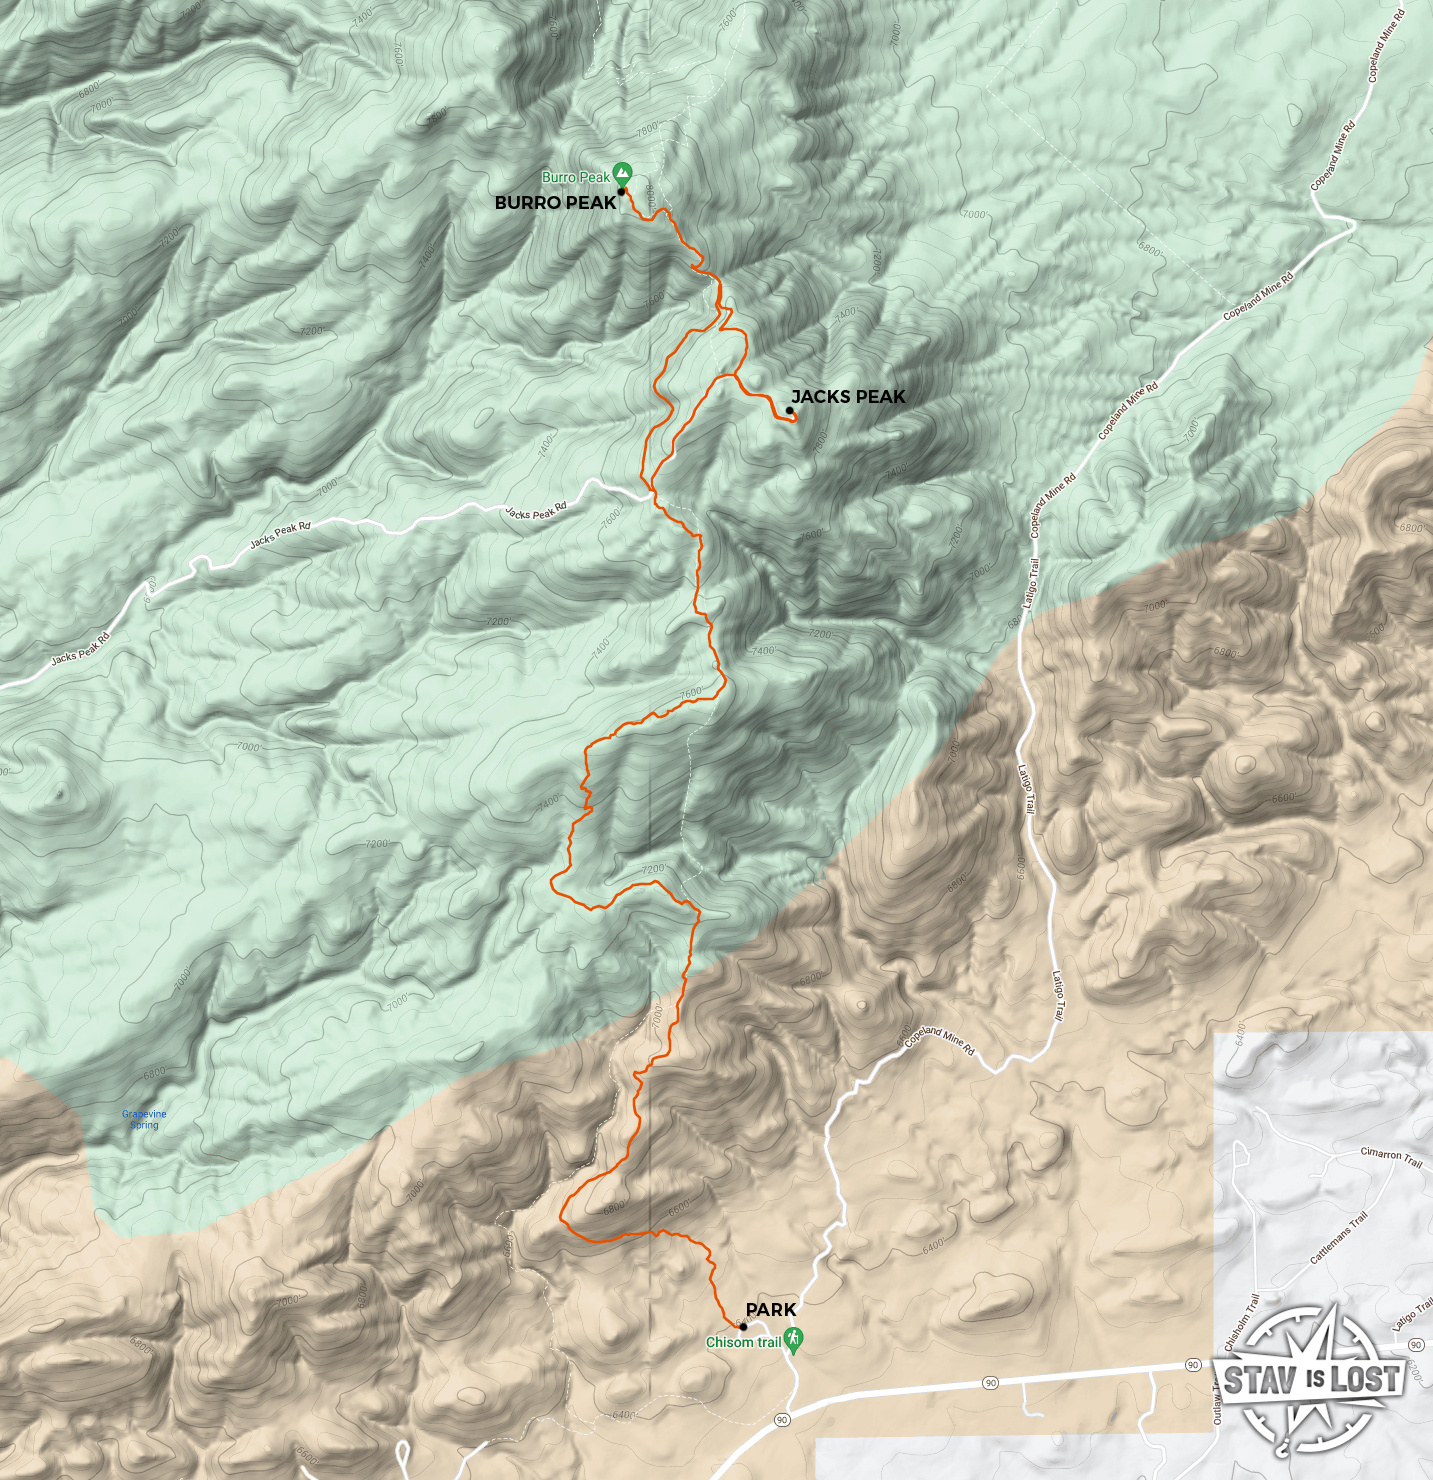 map for Burro Peak and Jacks Peak via Continental Divide Trail by stav is lost